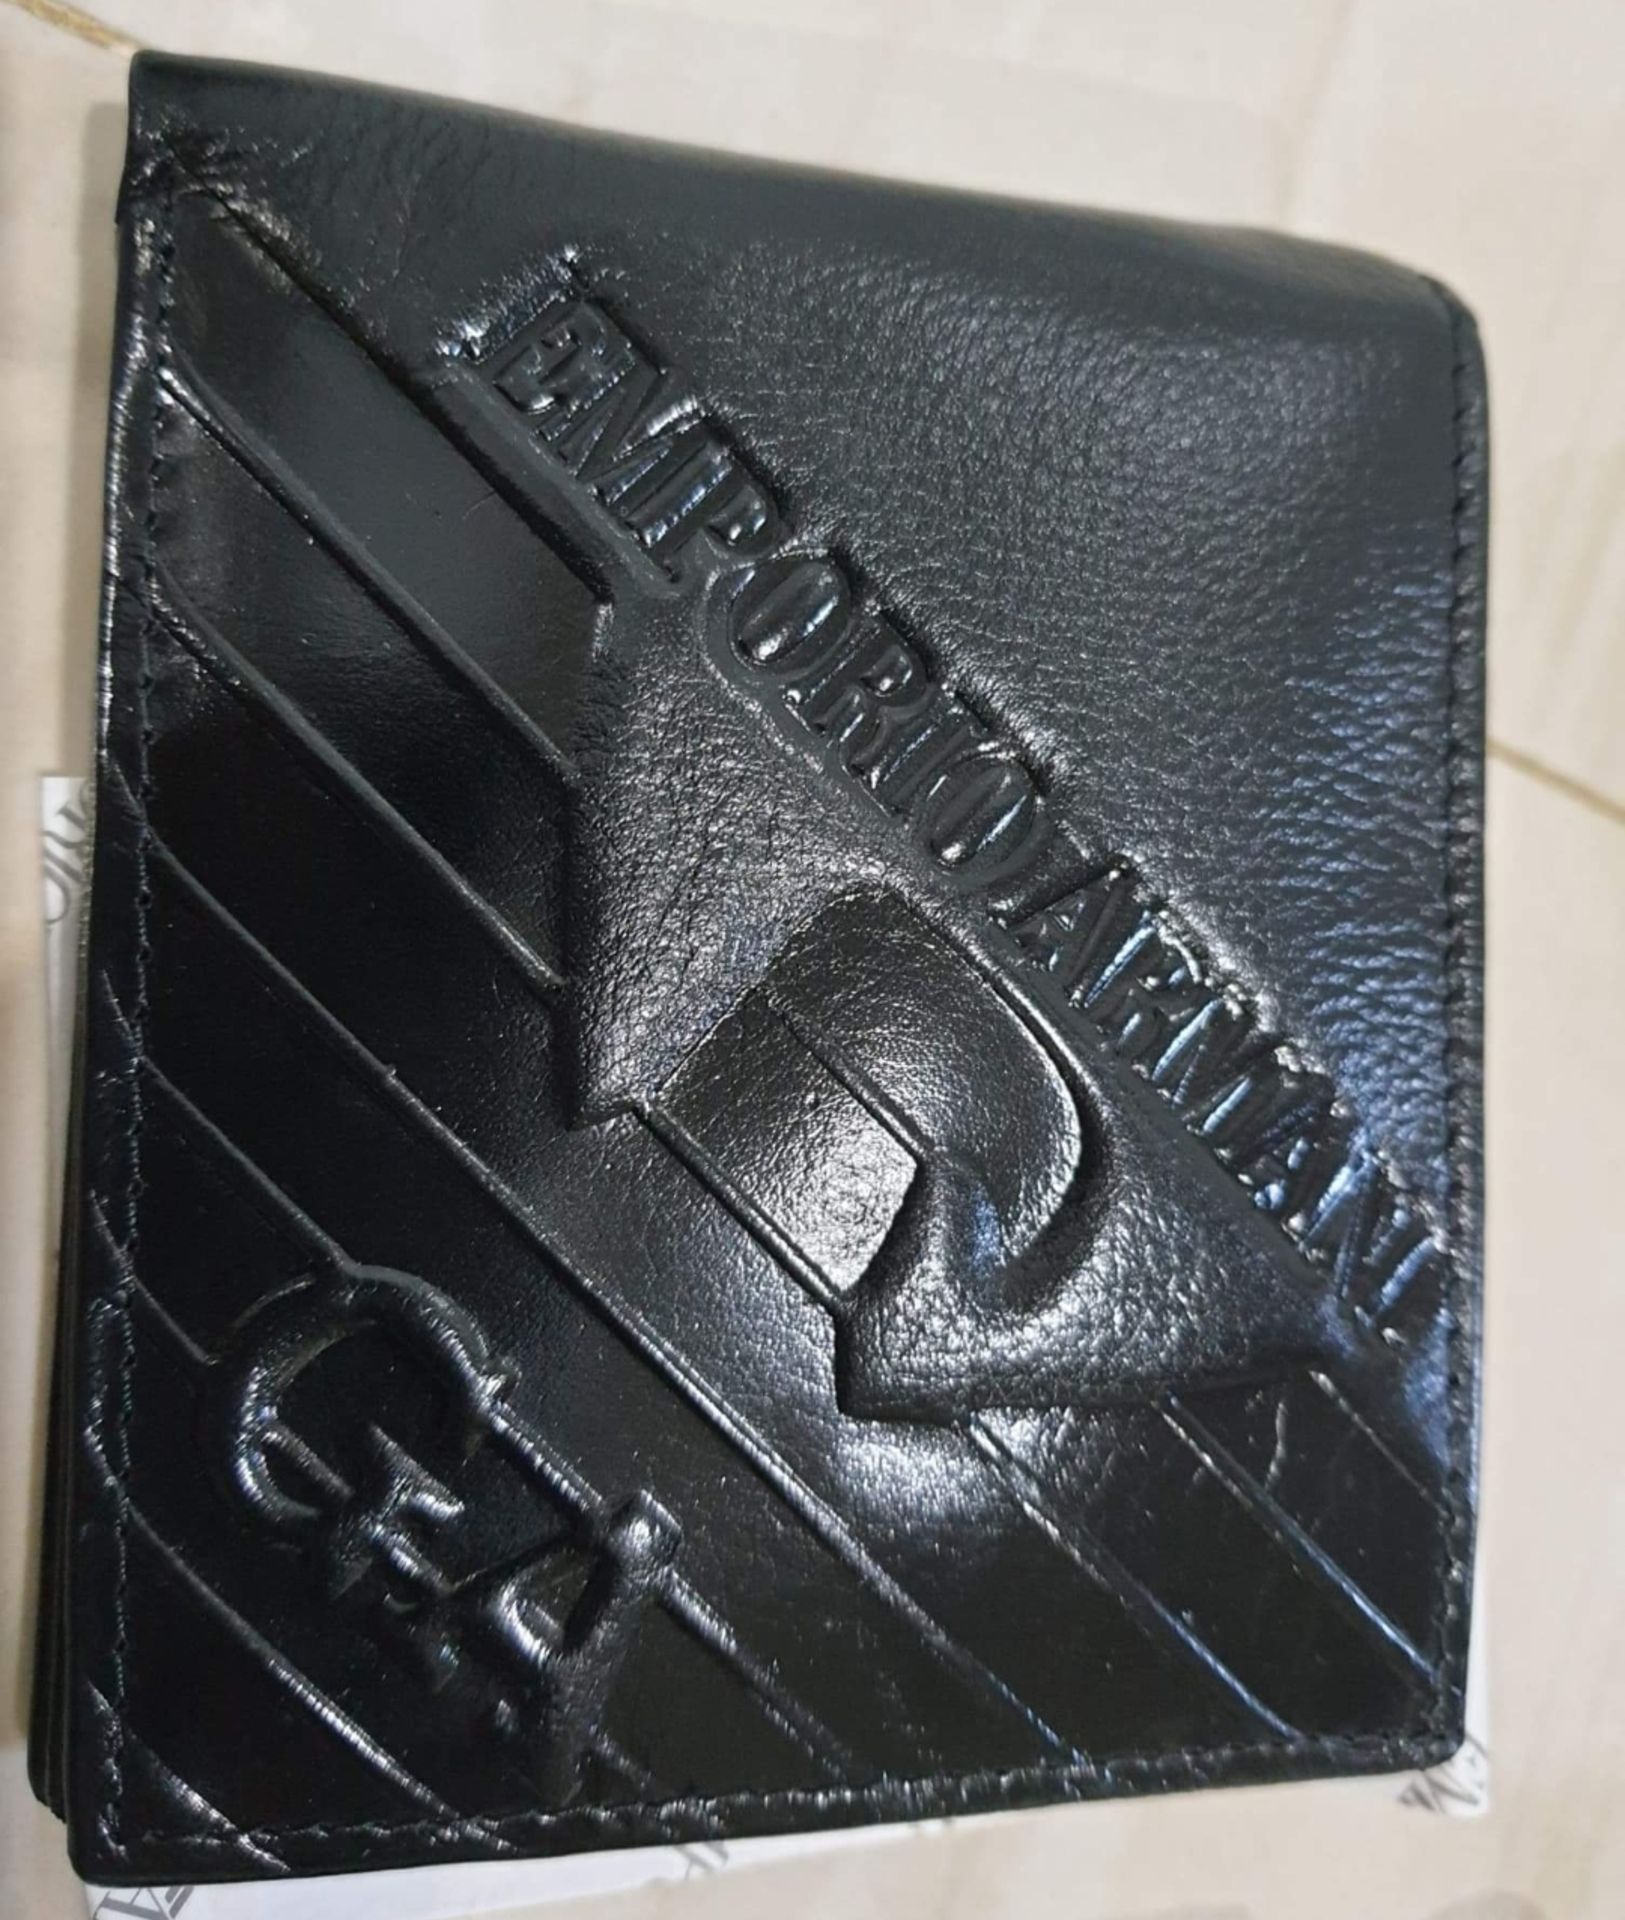 Emporio Armani Men's Leather Wallet - New With Box - Image 2 of 5